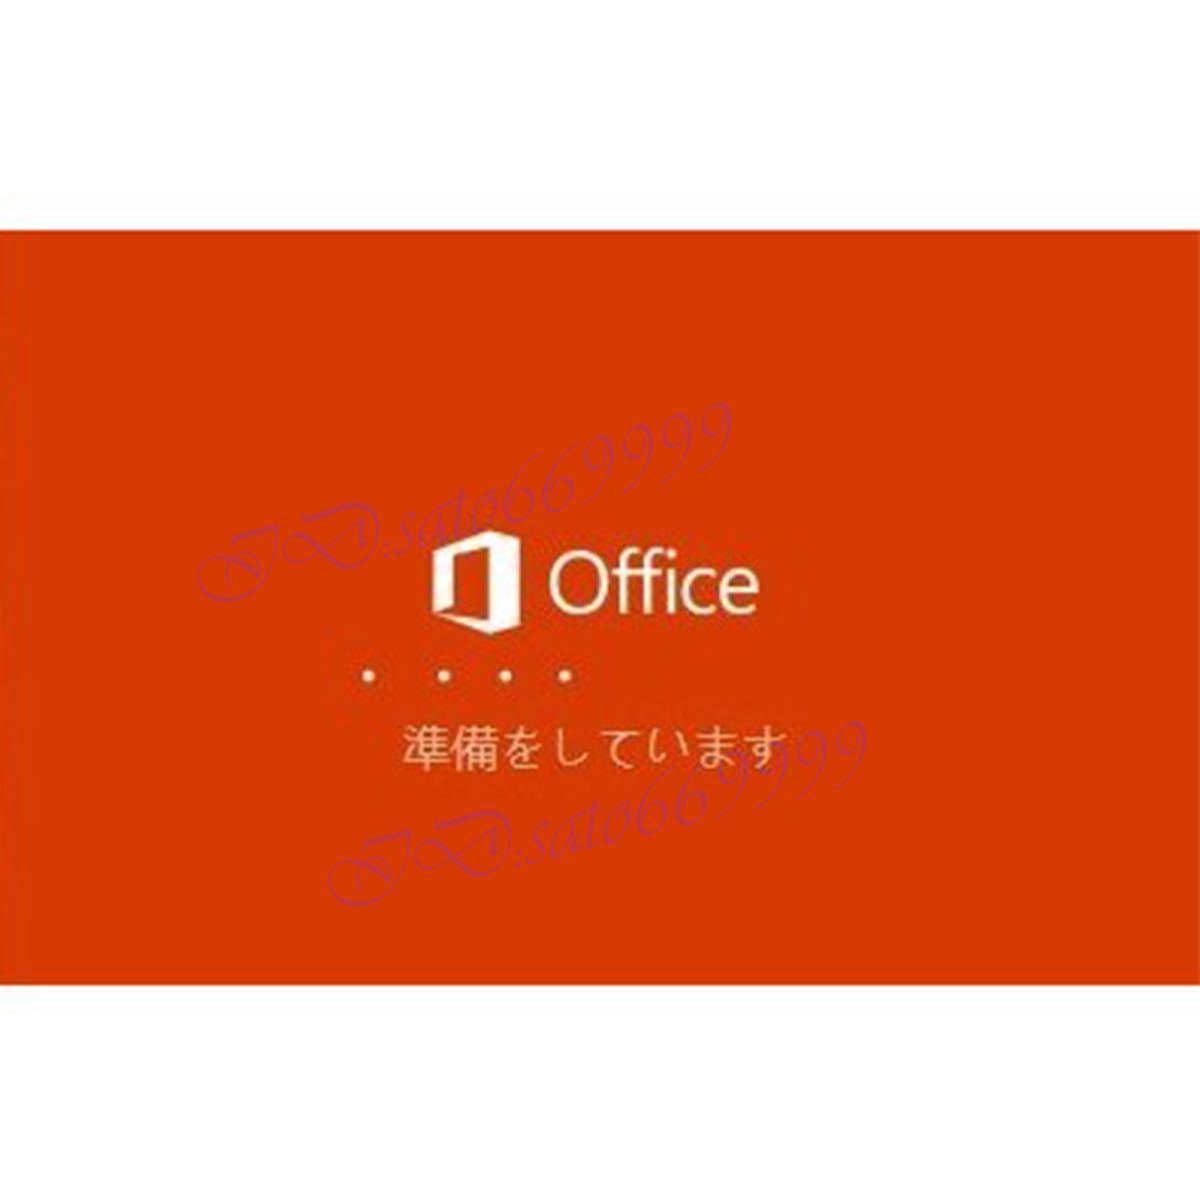 Microsoft Office2021 Professional Plusプロダクトキー日本語 正規認証保証Word Excel PowerPoint Access 安心サポート付き　水_画像2